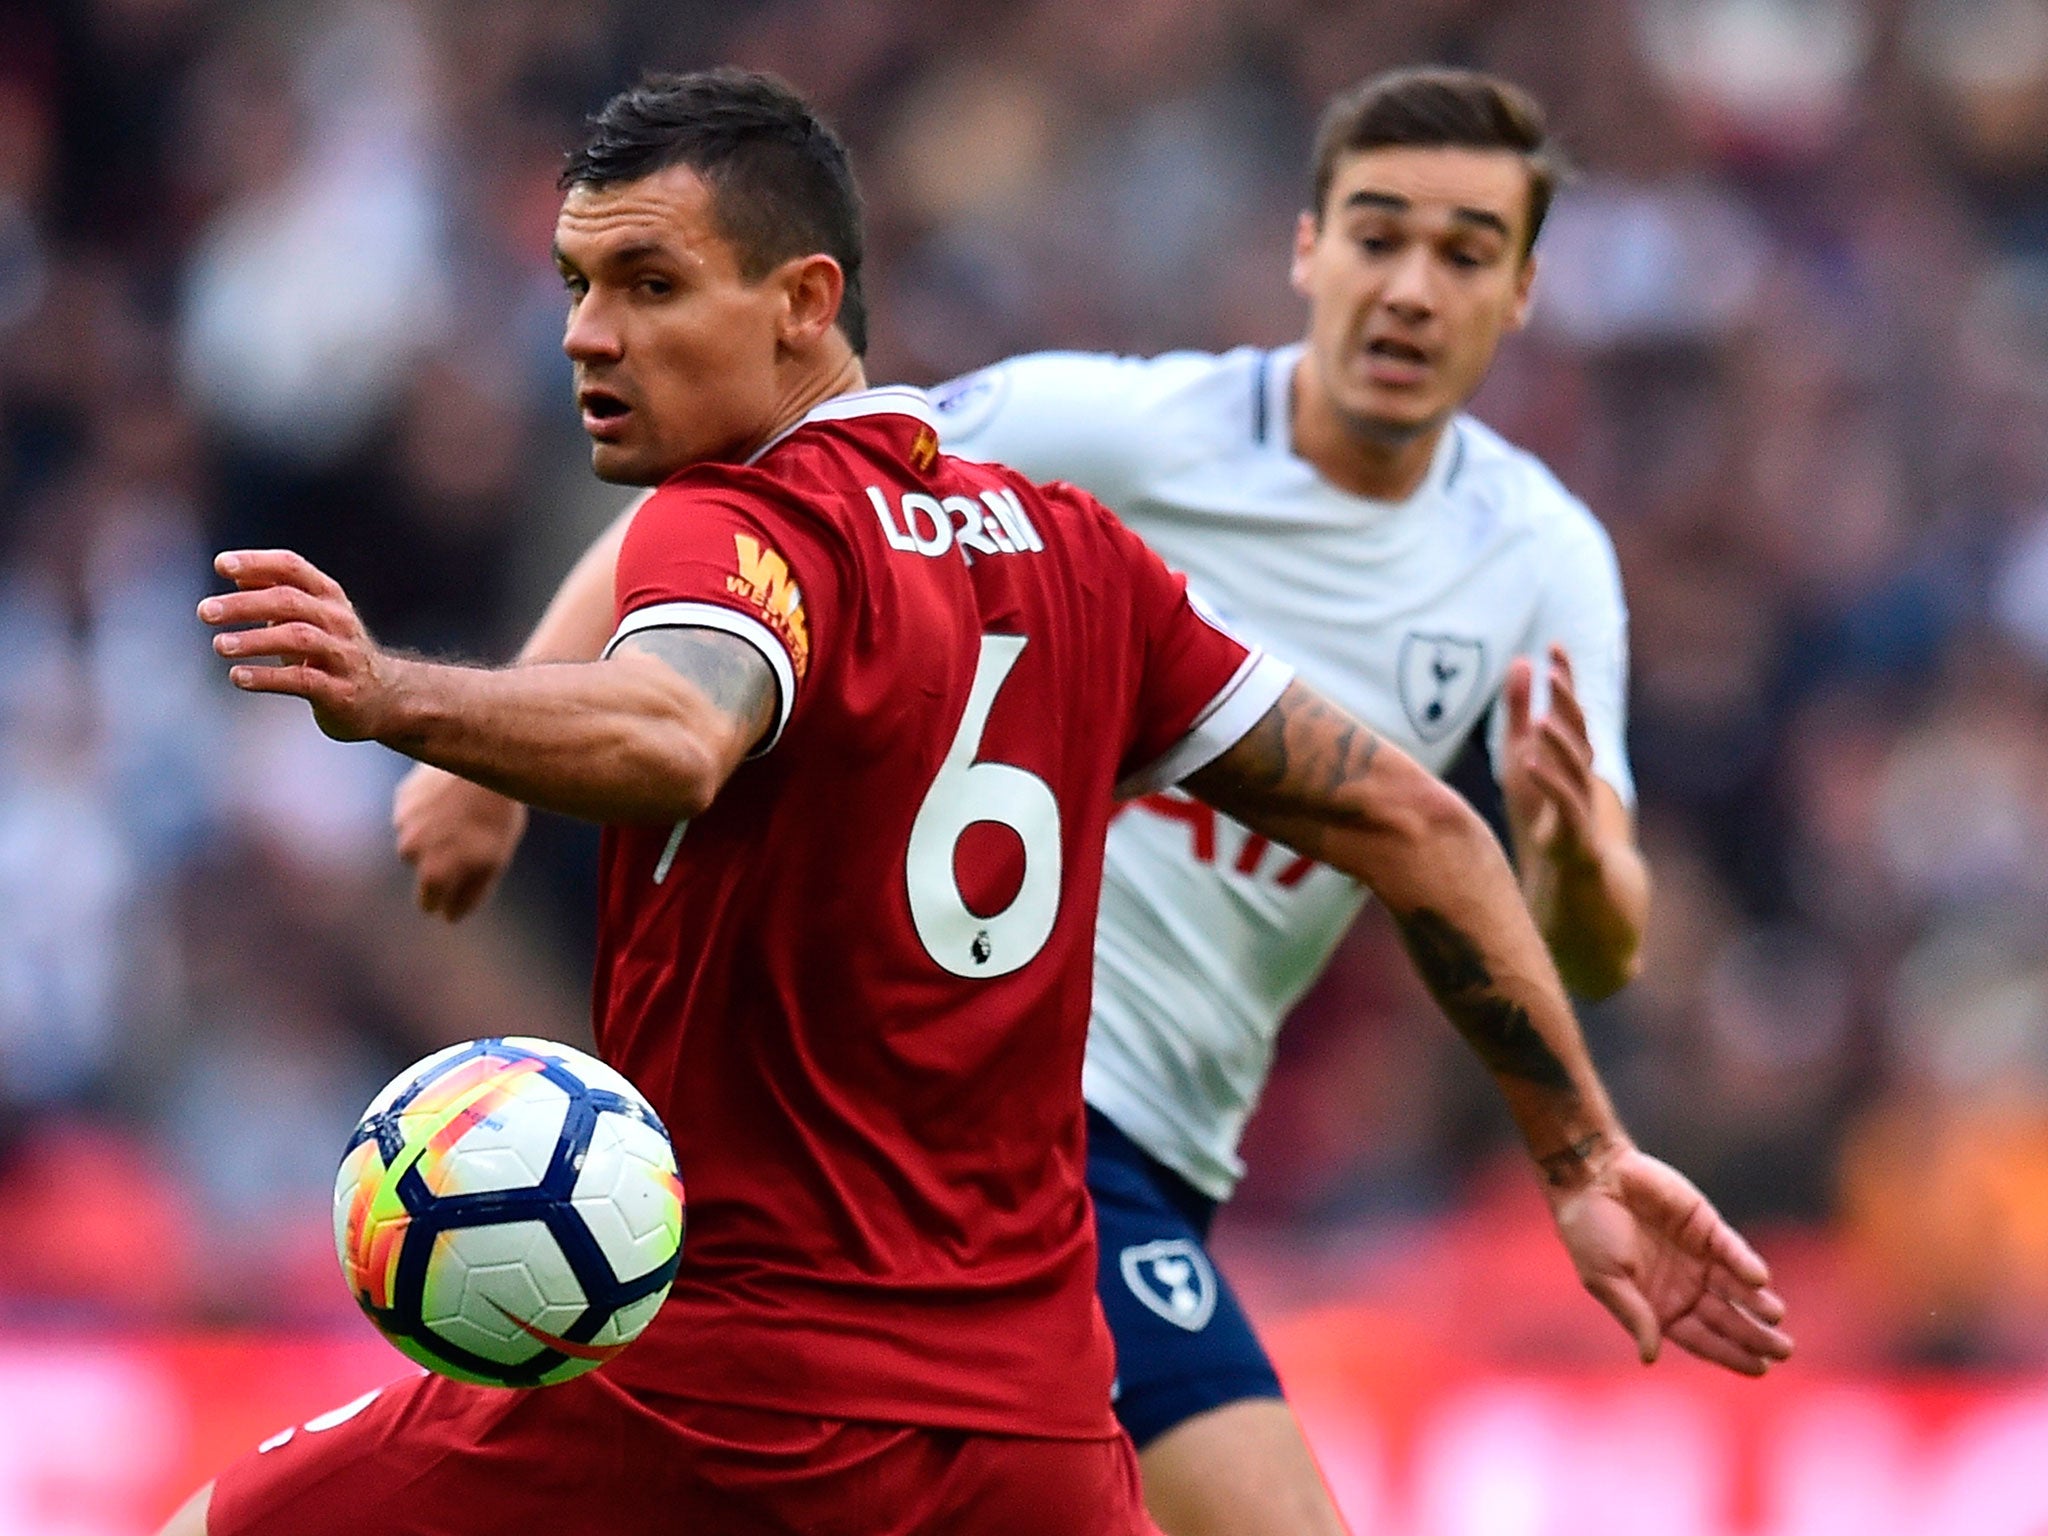 &#13;
Lovren was partially at fault for two of Liverpool's goals conceded &#13;